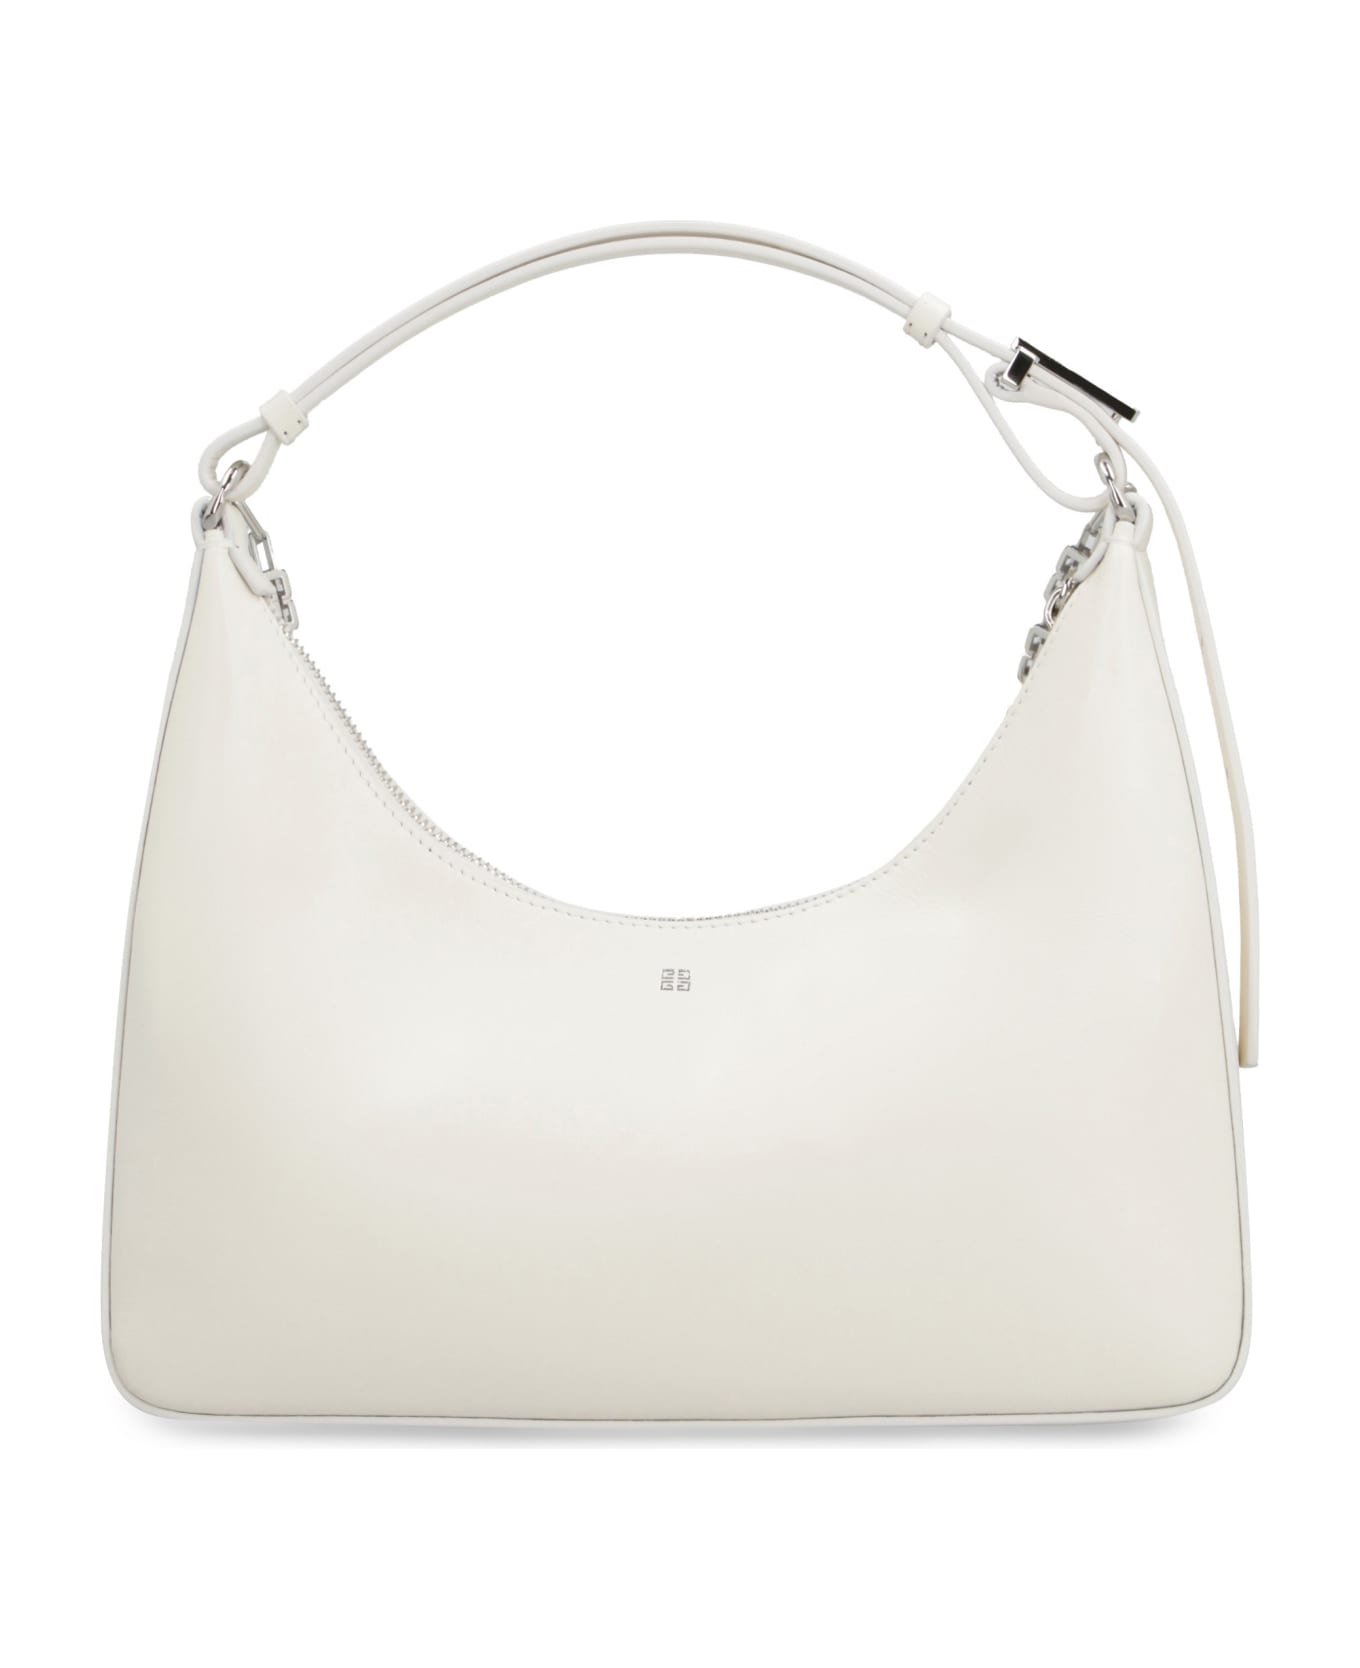 Givenchy Moon Cut Out Leather Shoulder Bag - White トートバッグ